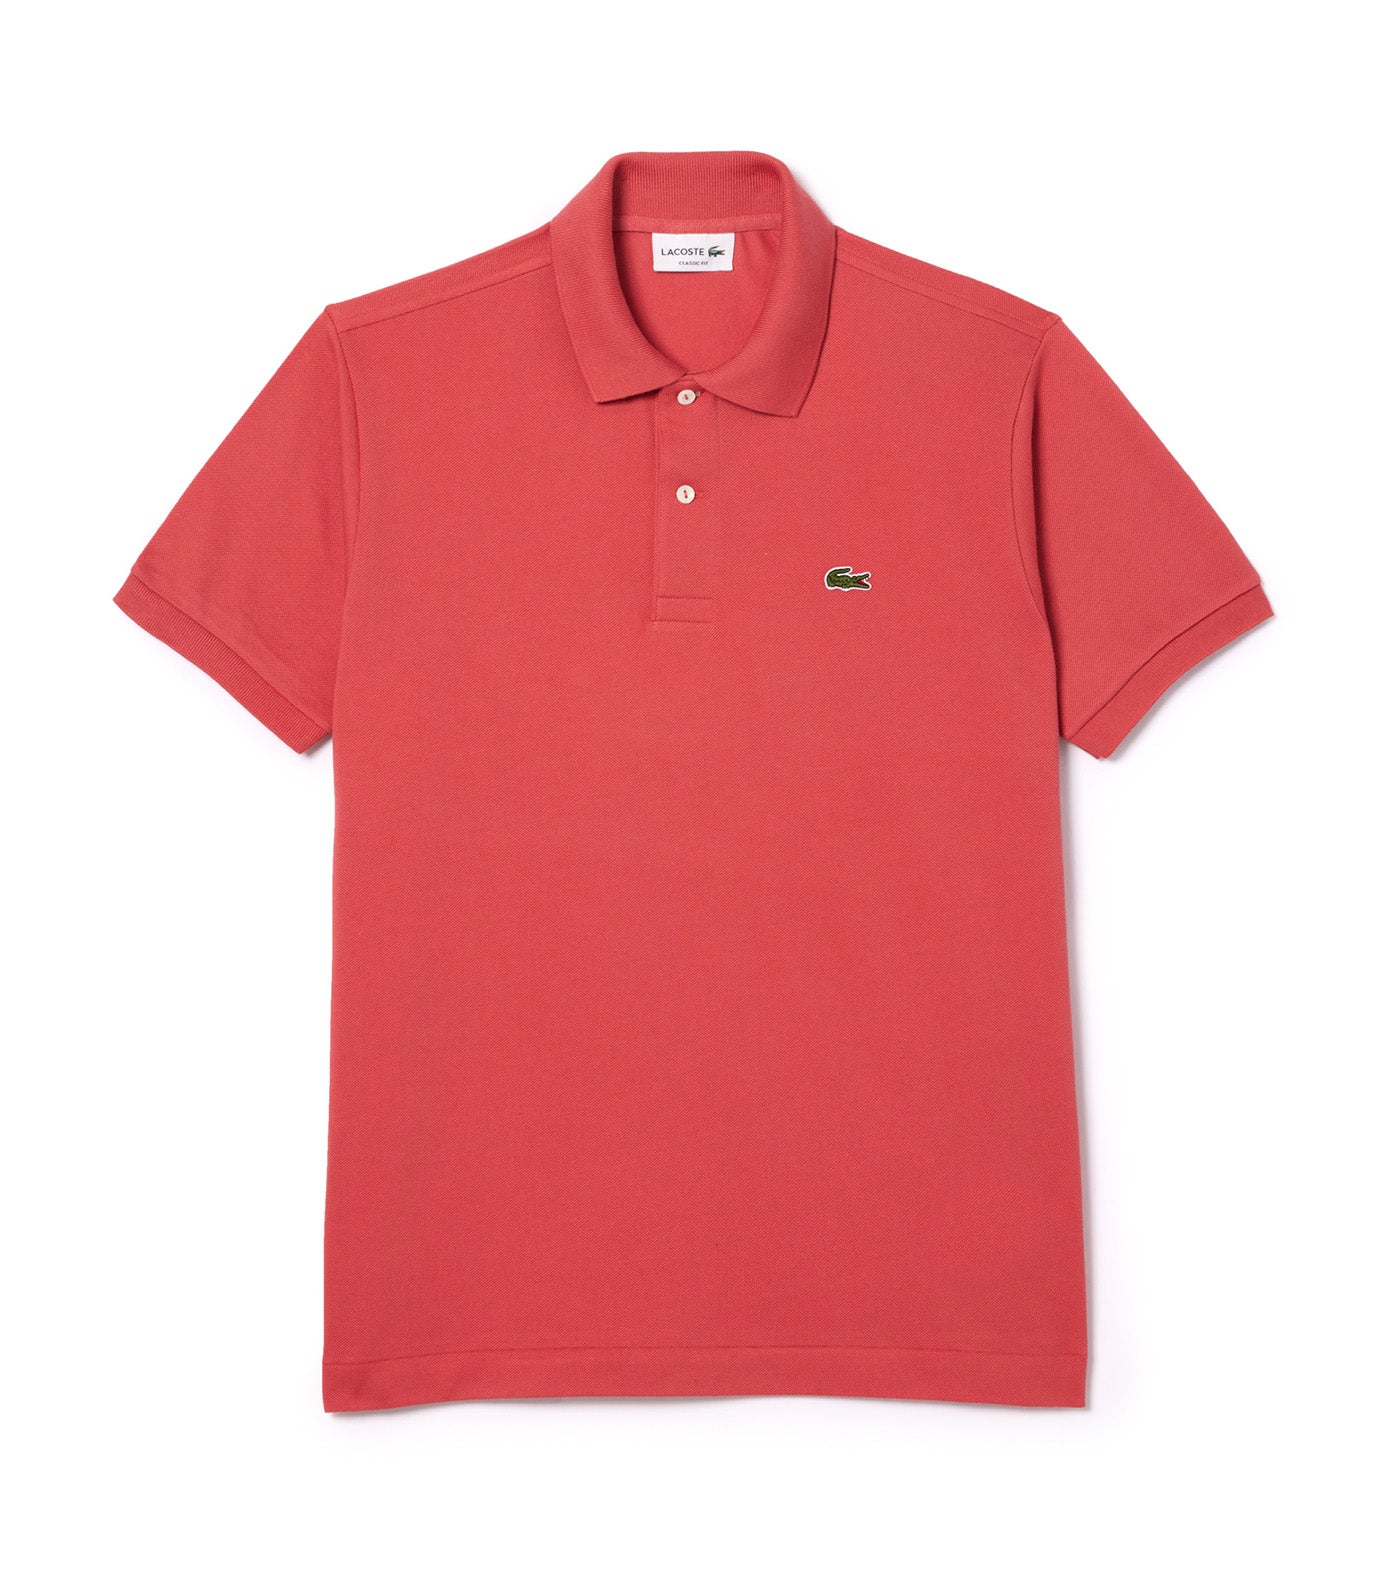 Lacoste Classic Fit L.12.12 Polo Shirt Sierra Red